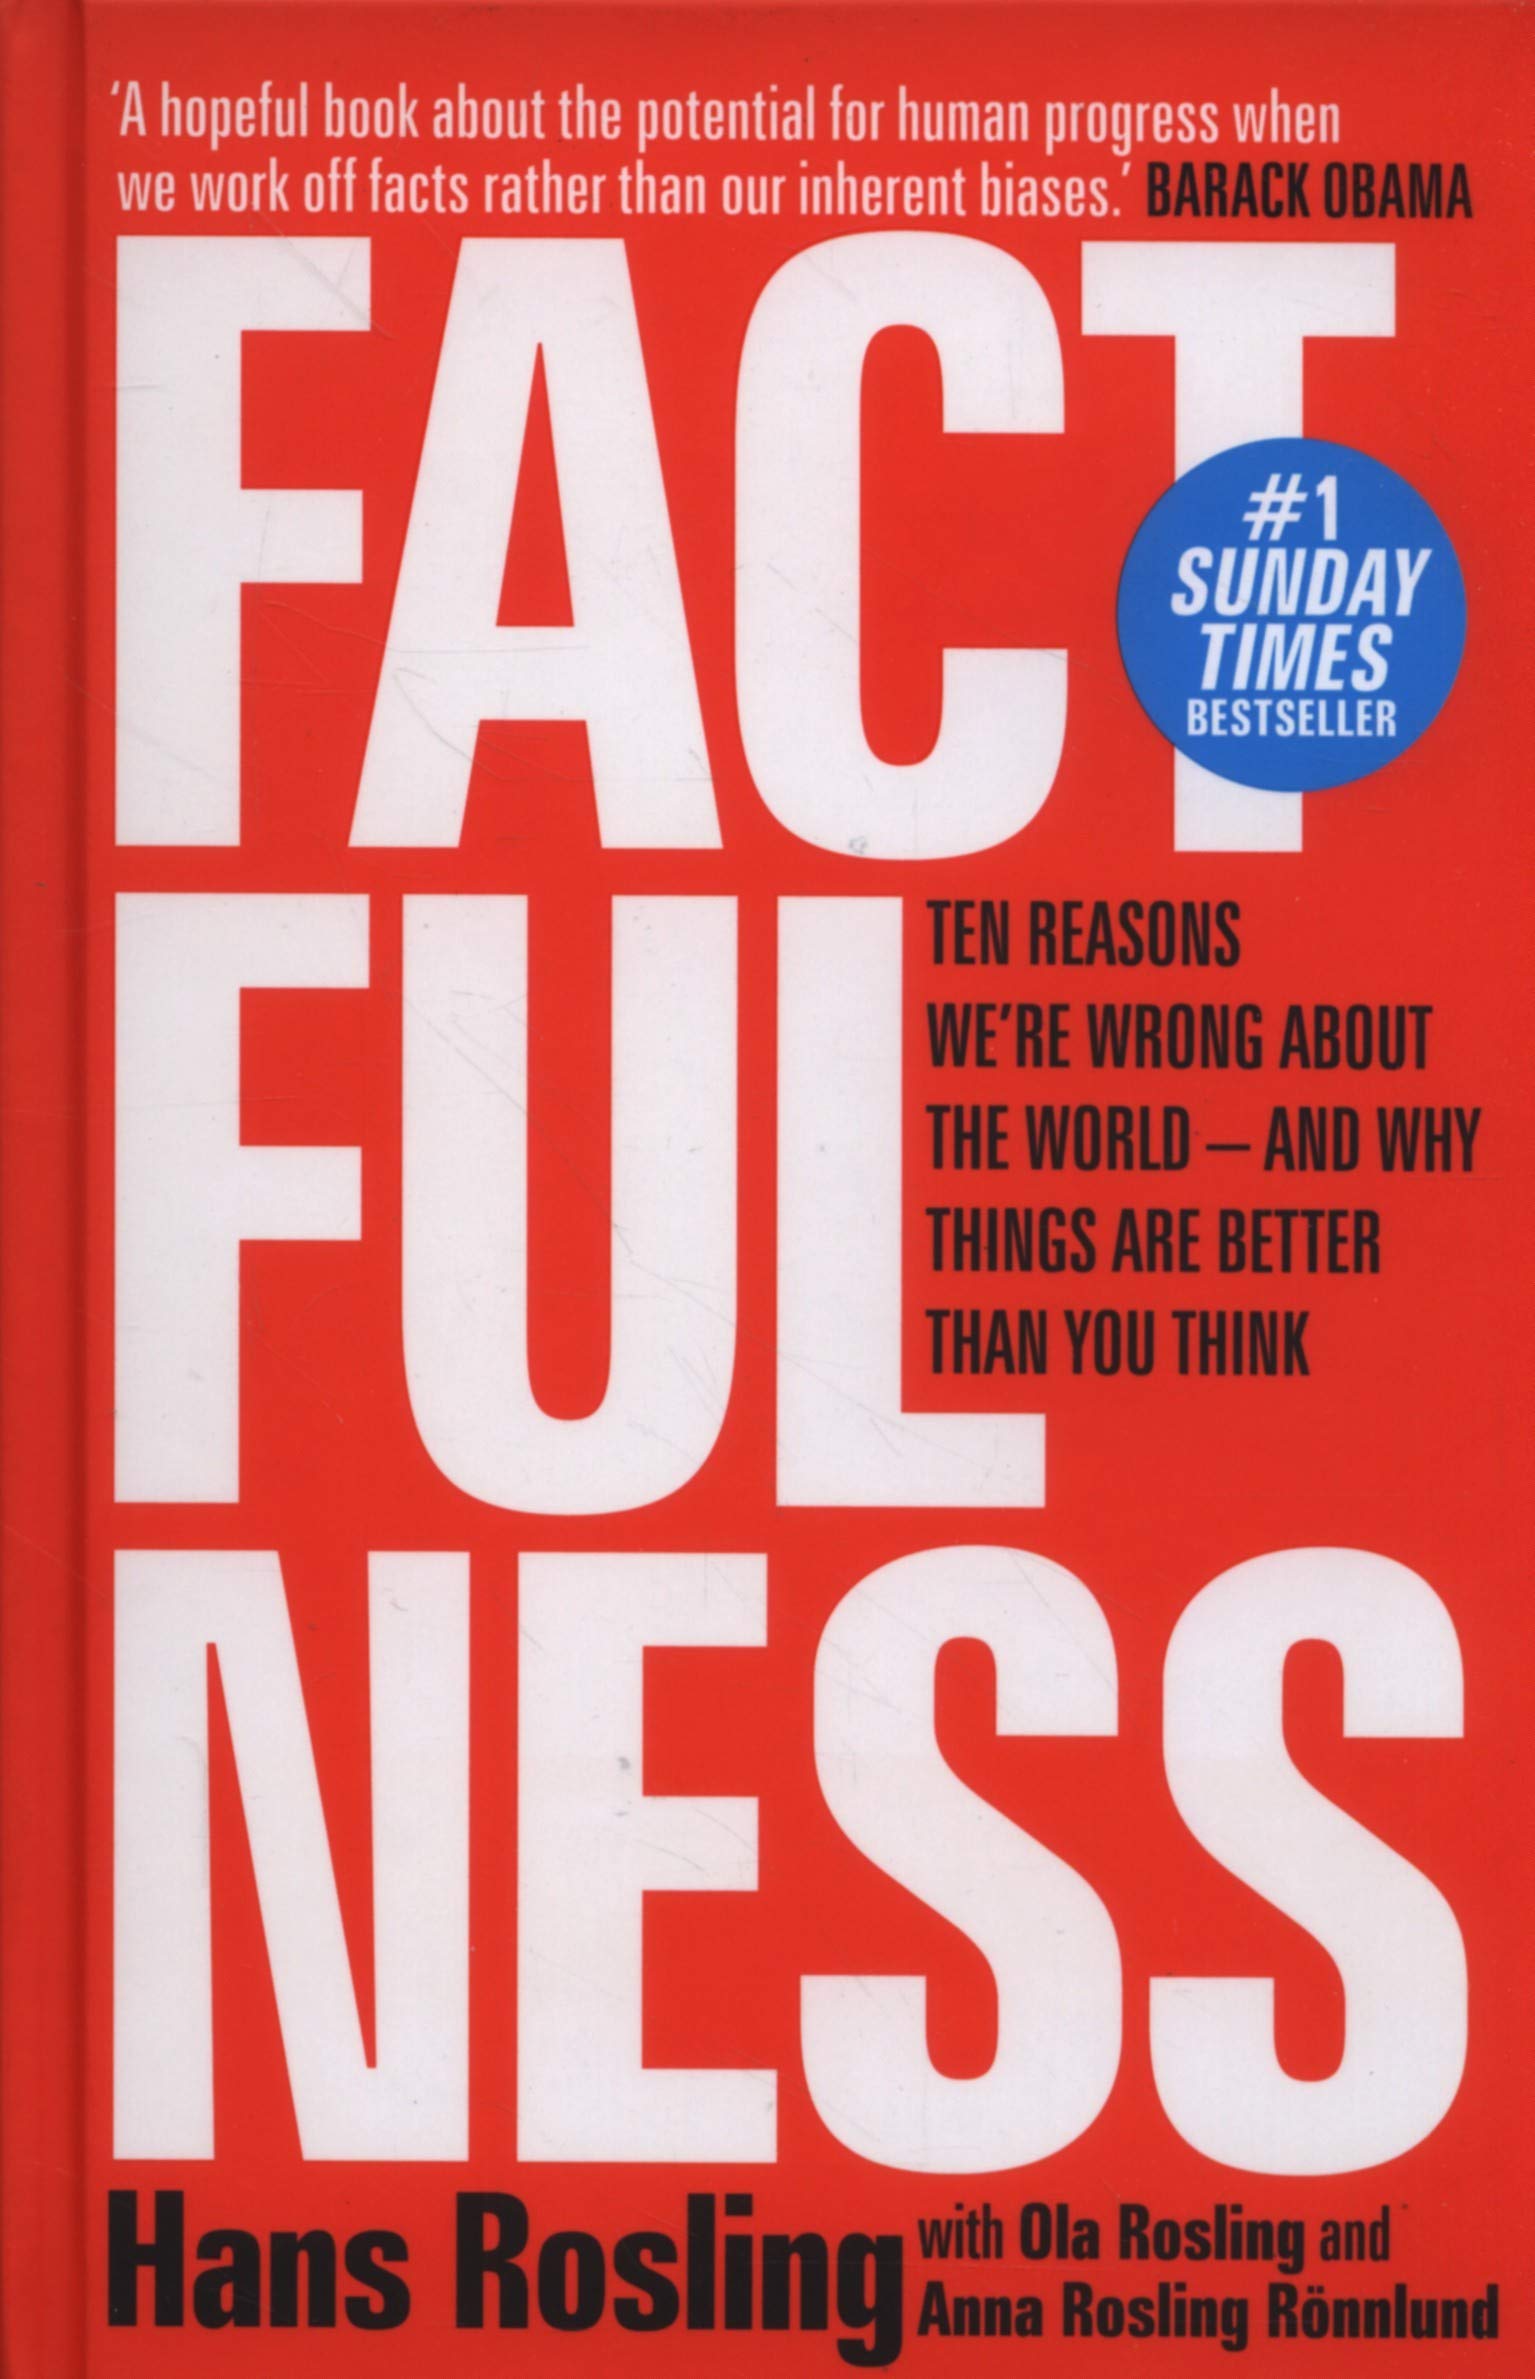 Factfulness: ten reasons we're wrong about the world and why things are better than we think